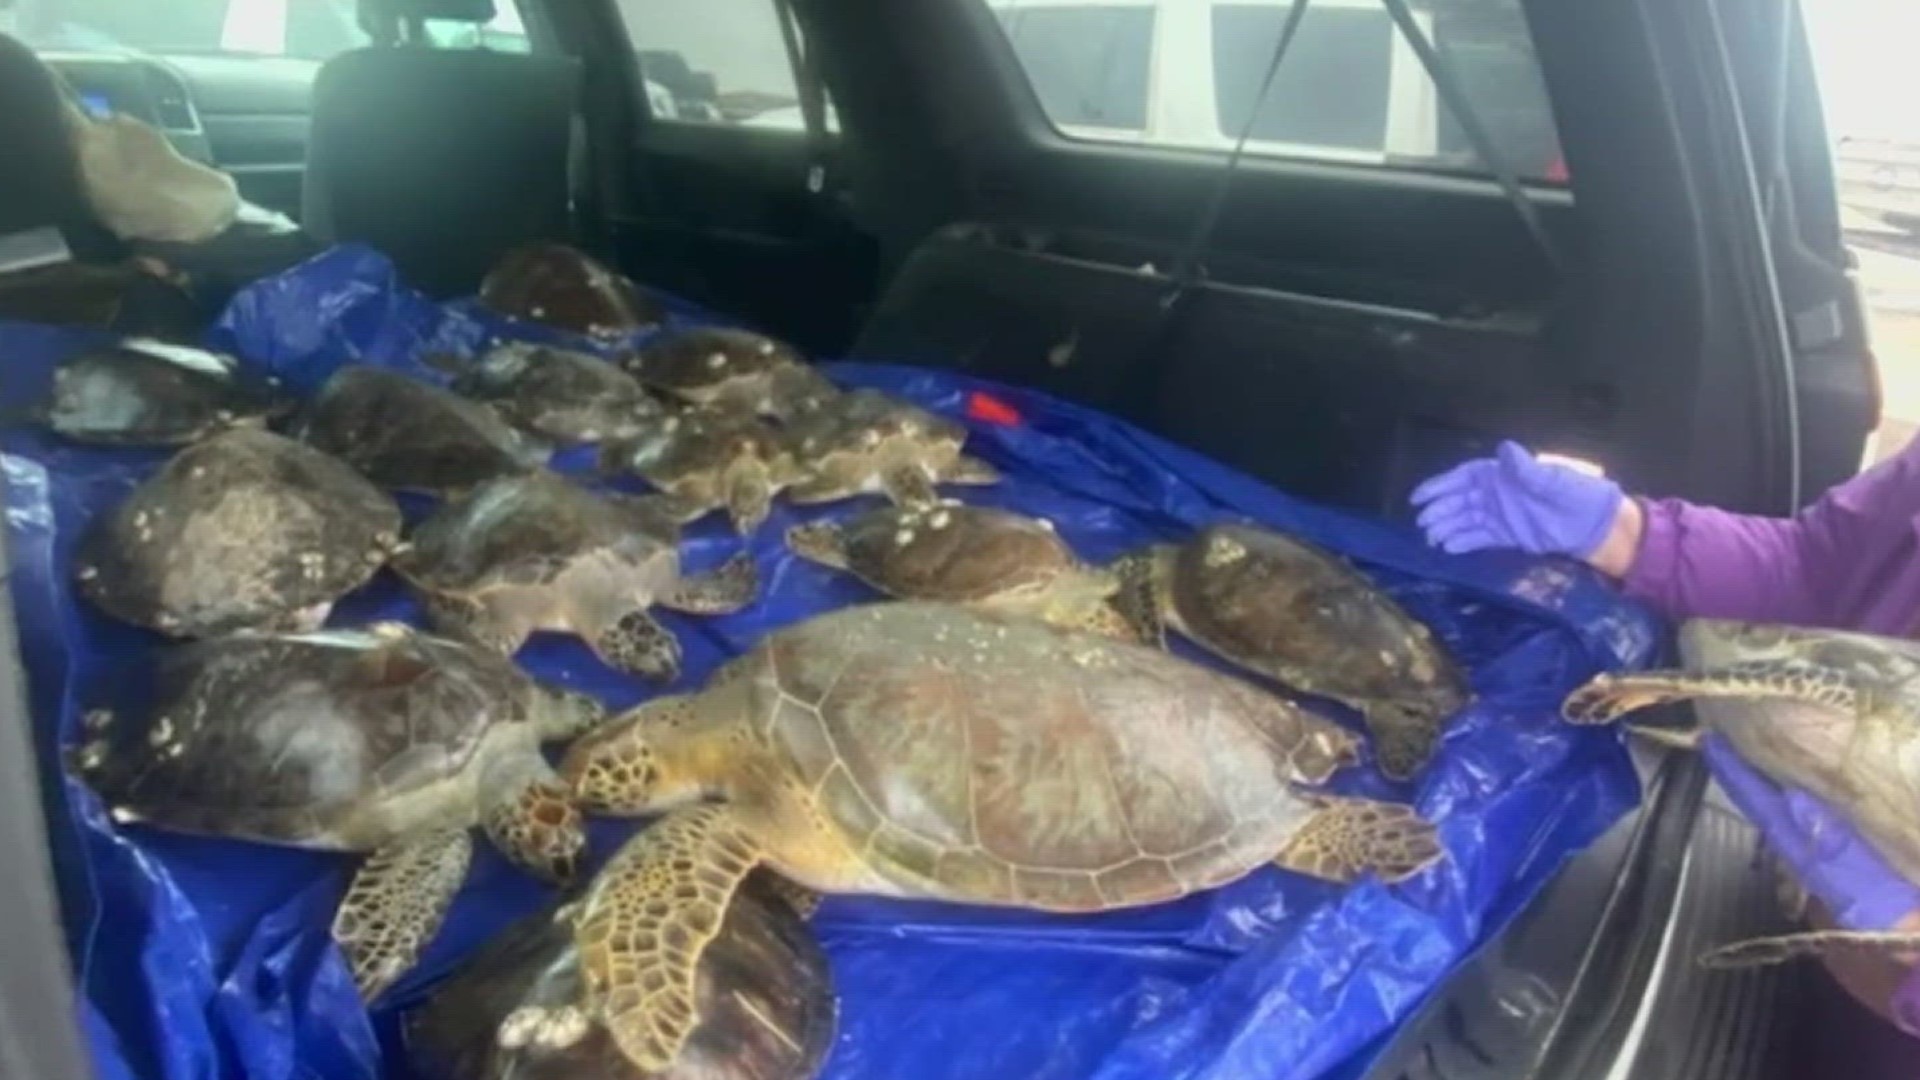 Nueces County Coastal Parks Director said 117 turtles were buried after the freezing cold fronts in early January.